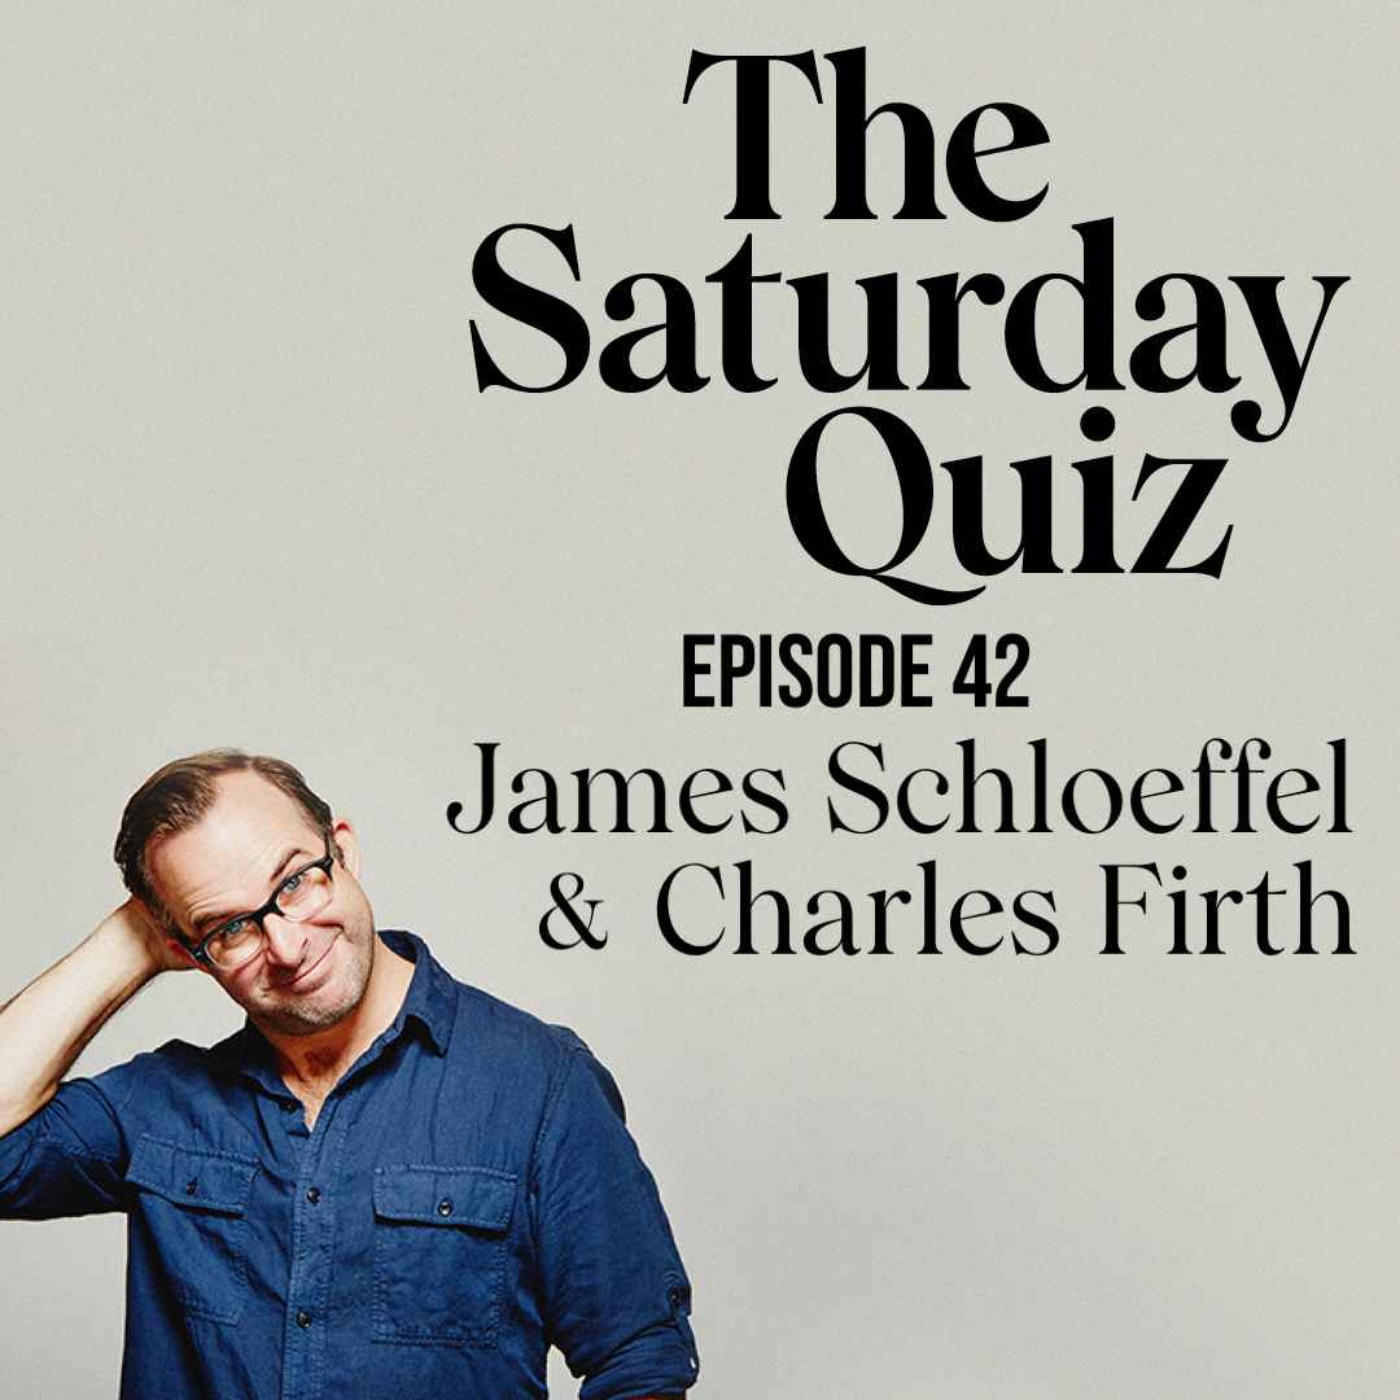 War On The Quiz with Charles Firth and James Schloeffel